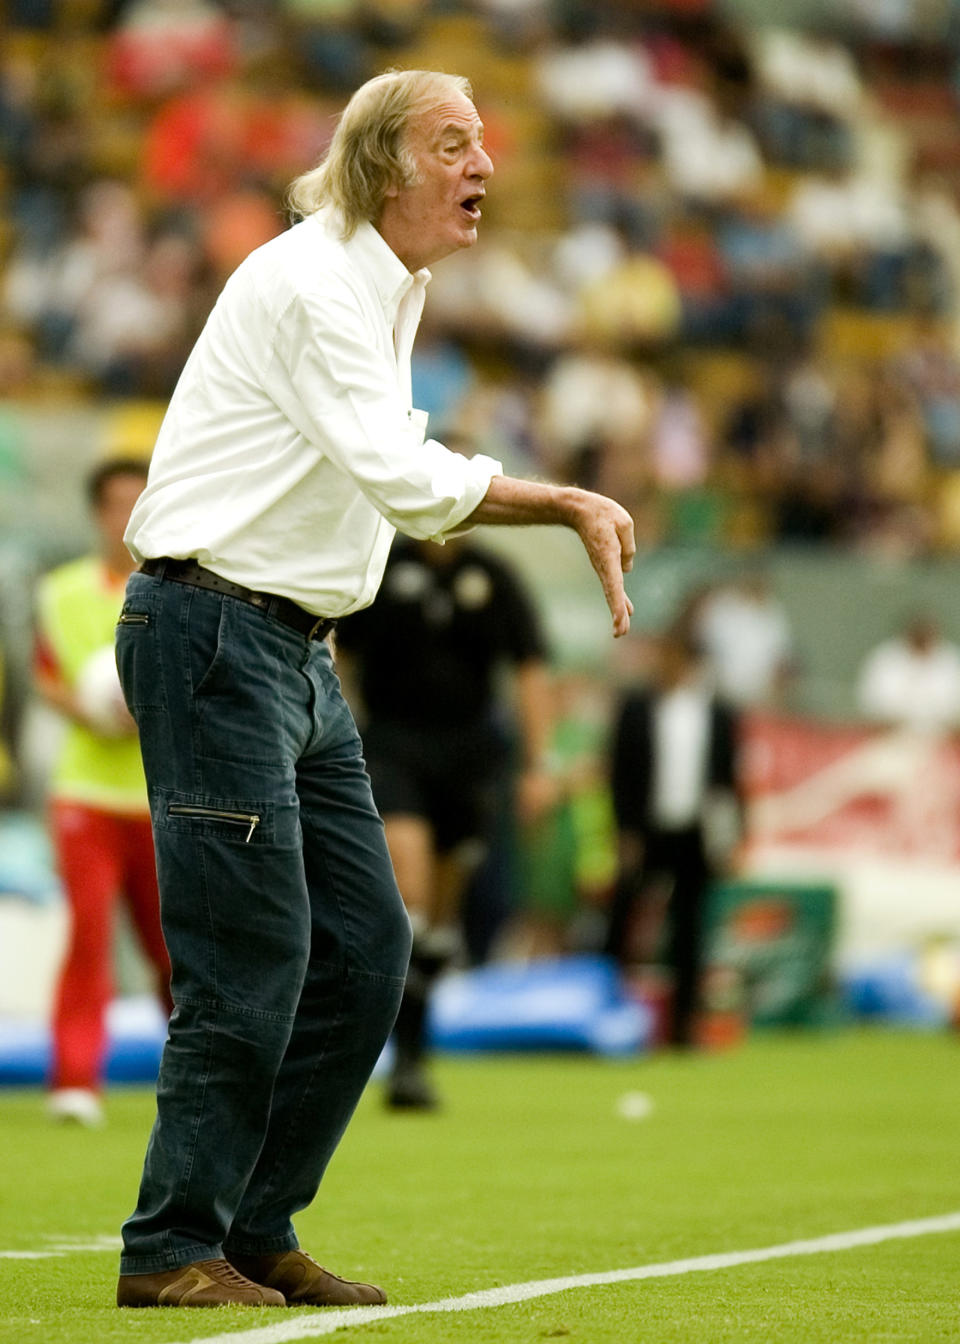 FILE - Soccer coach Cesar Luis Menotti, from Argentina, shouts instructions during a Mexico Soccer League match against Jaguares in Guadalajara, Mexico, Friday, Sept. 7, 2007. Menotti, the charismatic coach who led Argentina to its first World Cup title in 1978, has died, the Argentine Football Association said Sunday, May 5, 2024. He was 85. (AP Photo/Guillermo Arias, File)